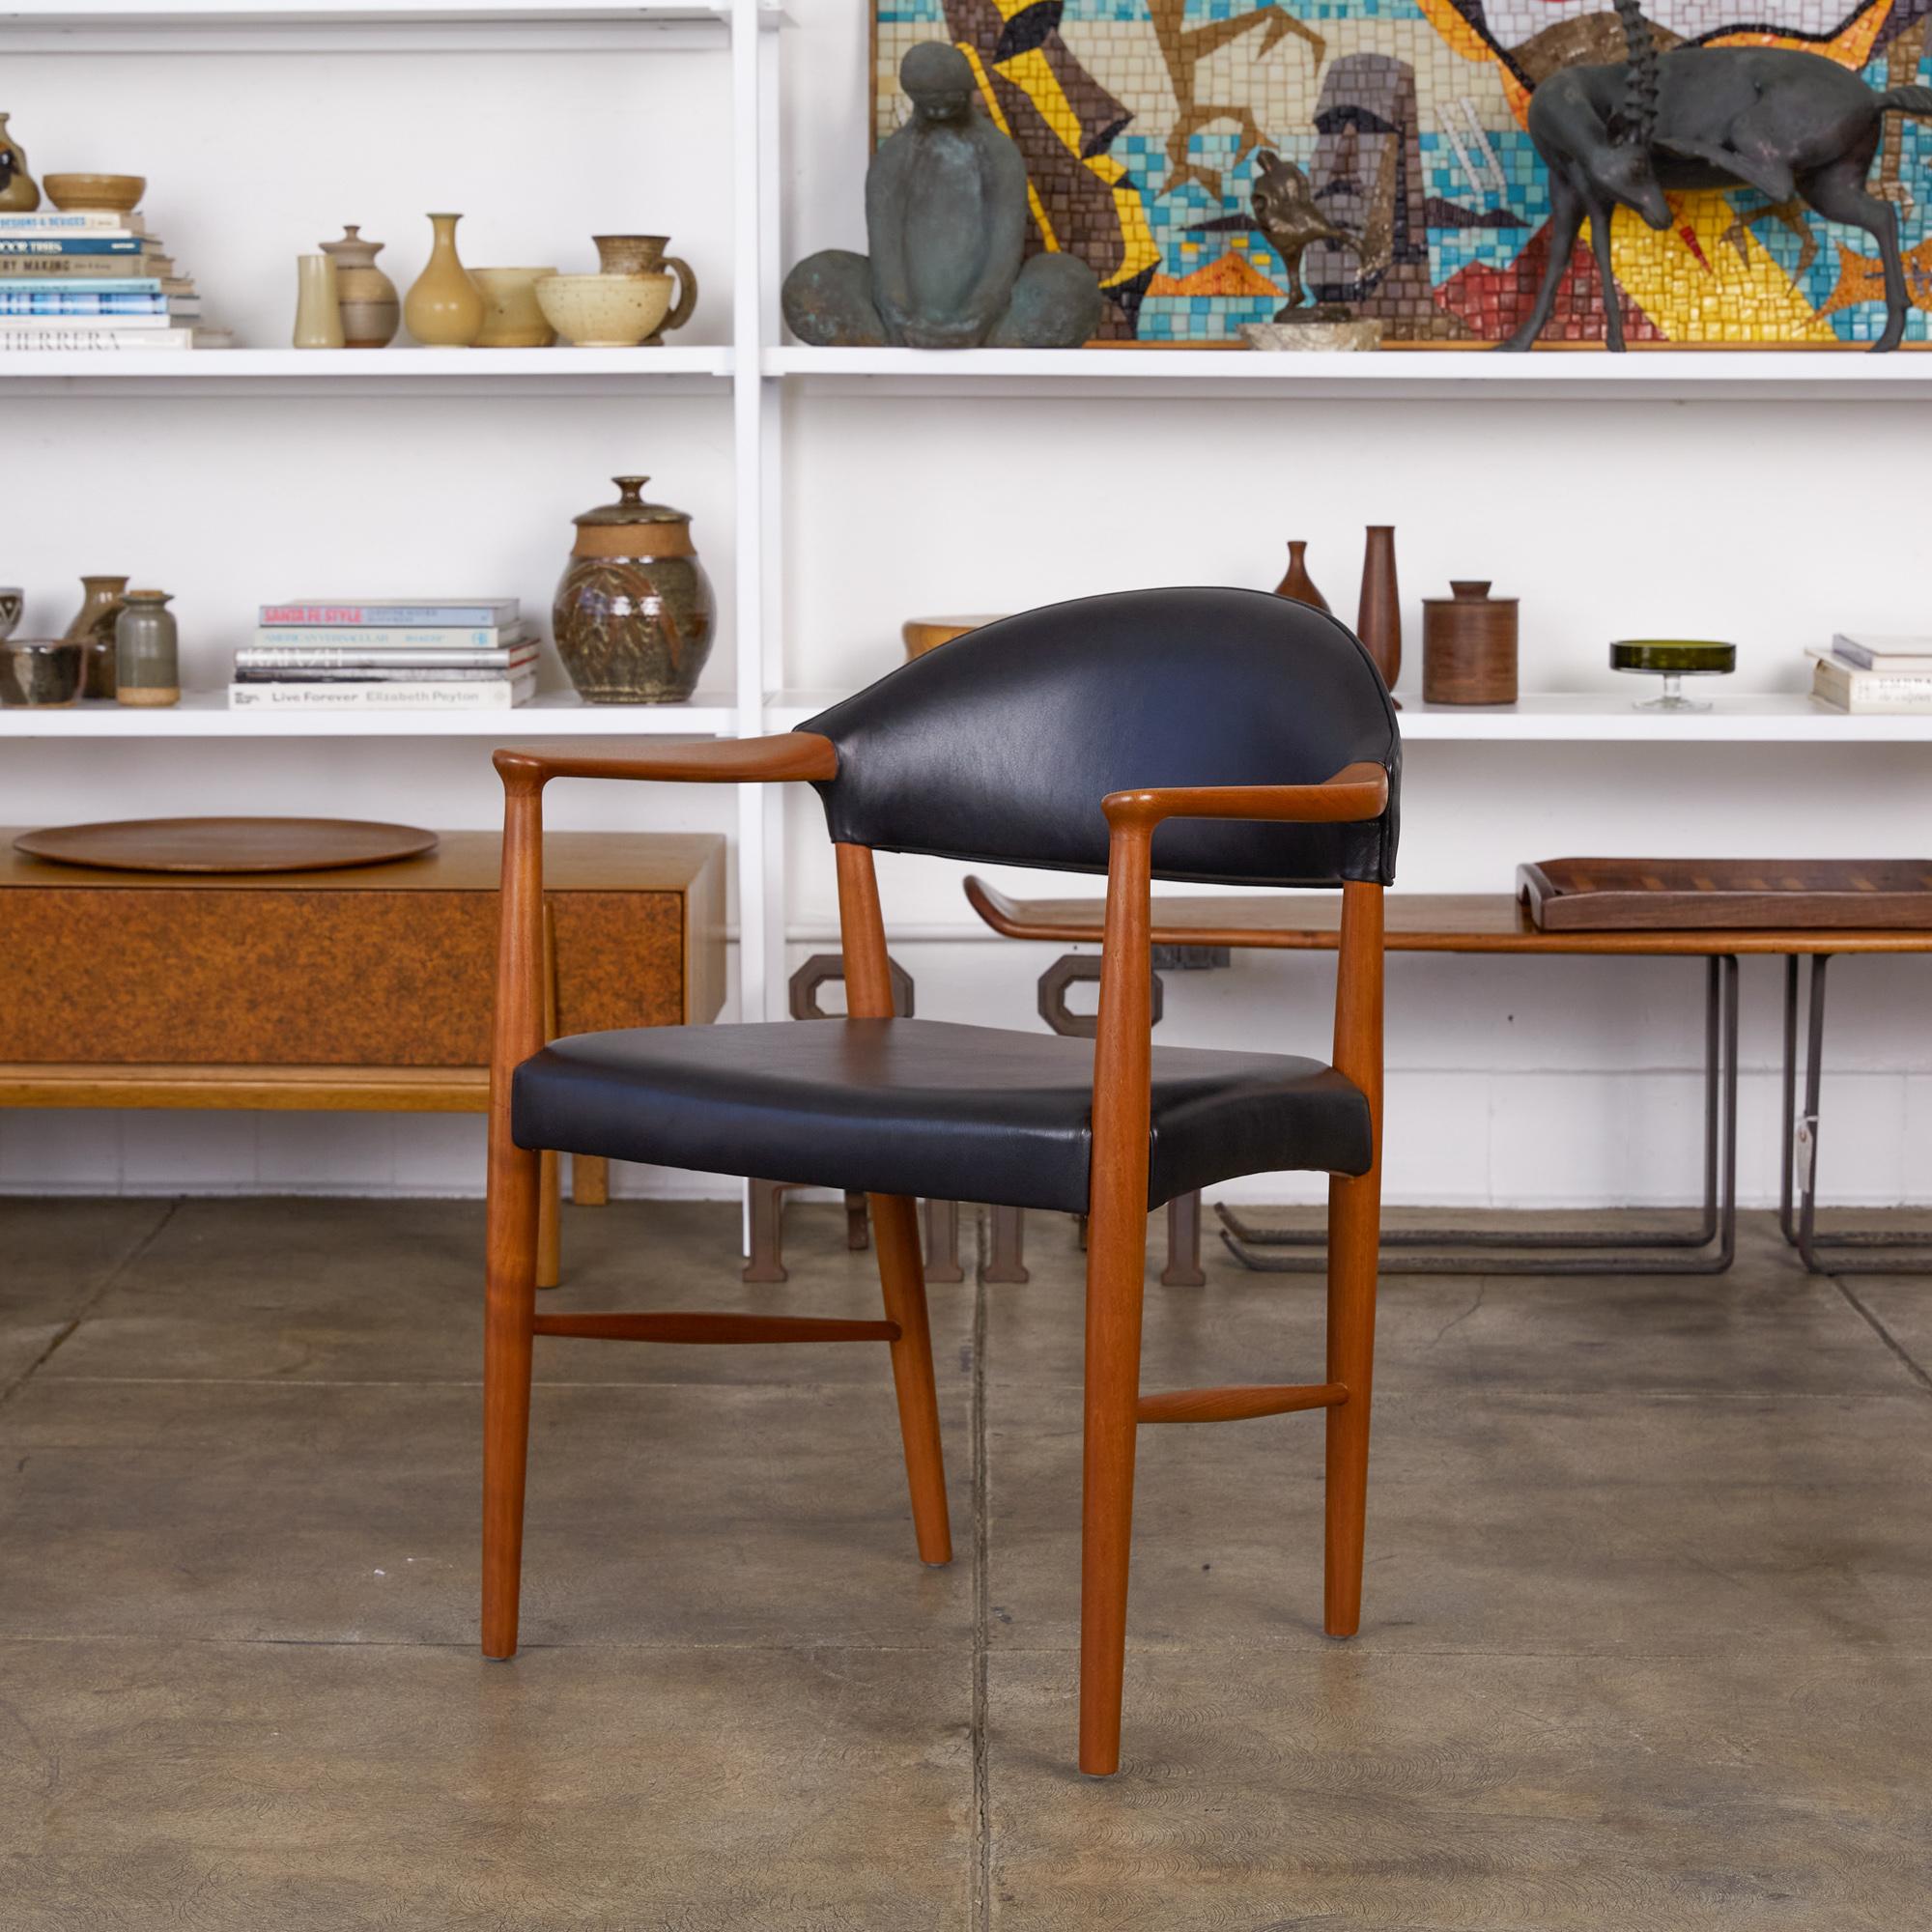 Teak and leather armchair by Ejnar Larsen and A. (Aksel) Bender Madsen for Willy Beck, Denmark, circa 1950s. The chair features a fully upholstered seat and backrest in a supple black leather. The sculpted armrests and legs are made from teak. The